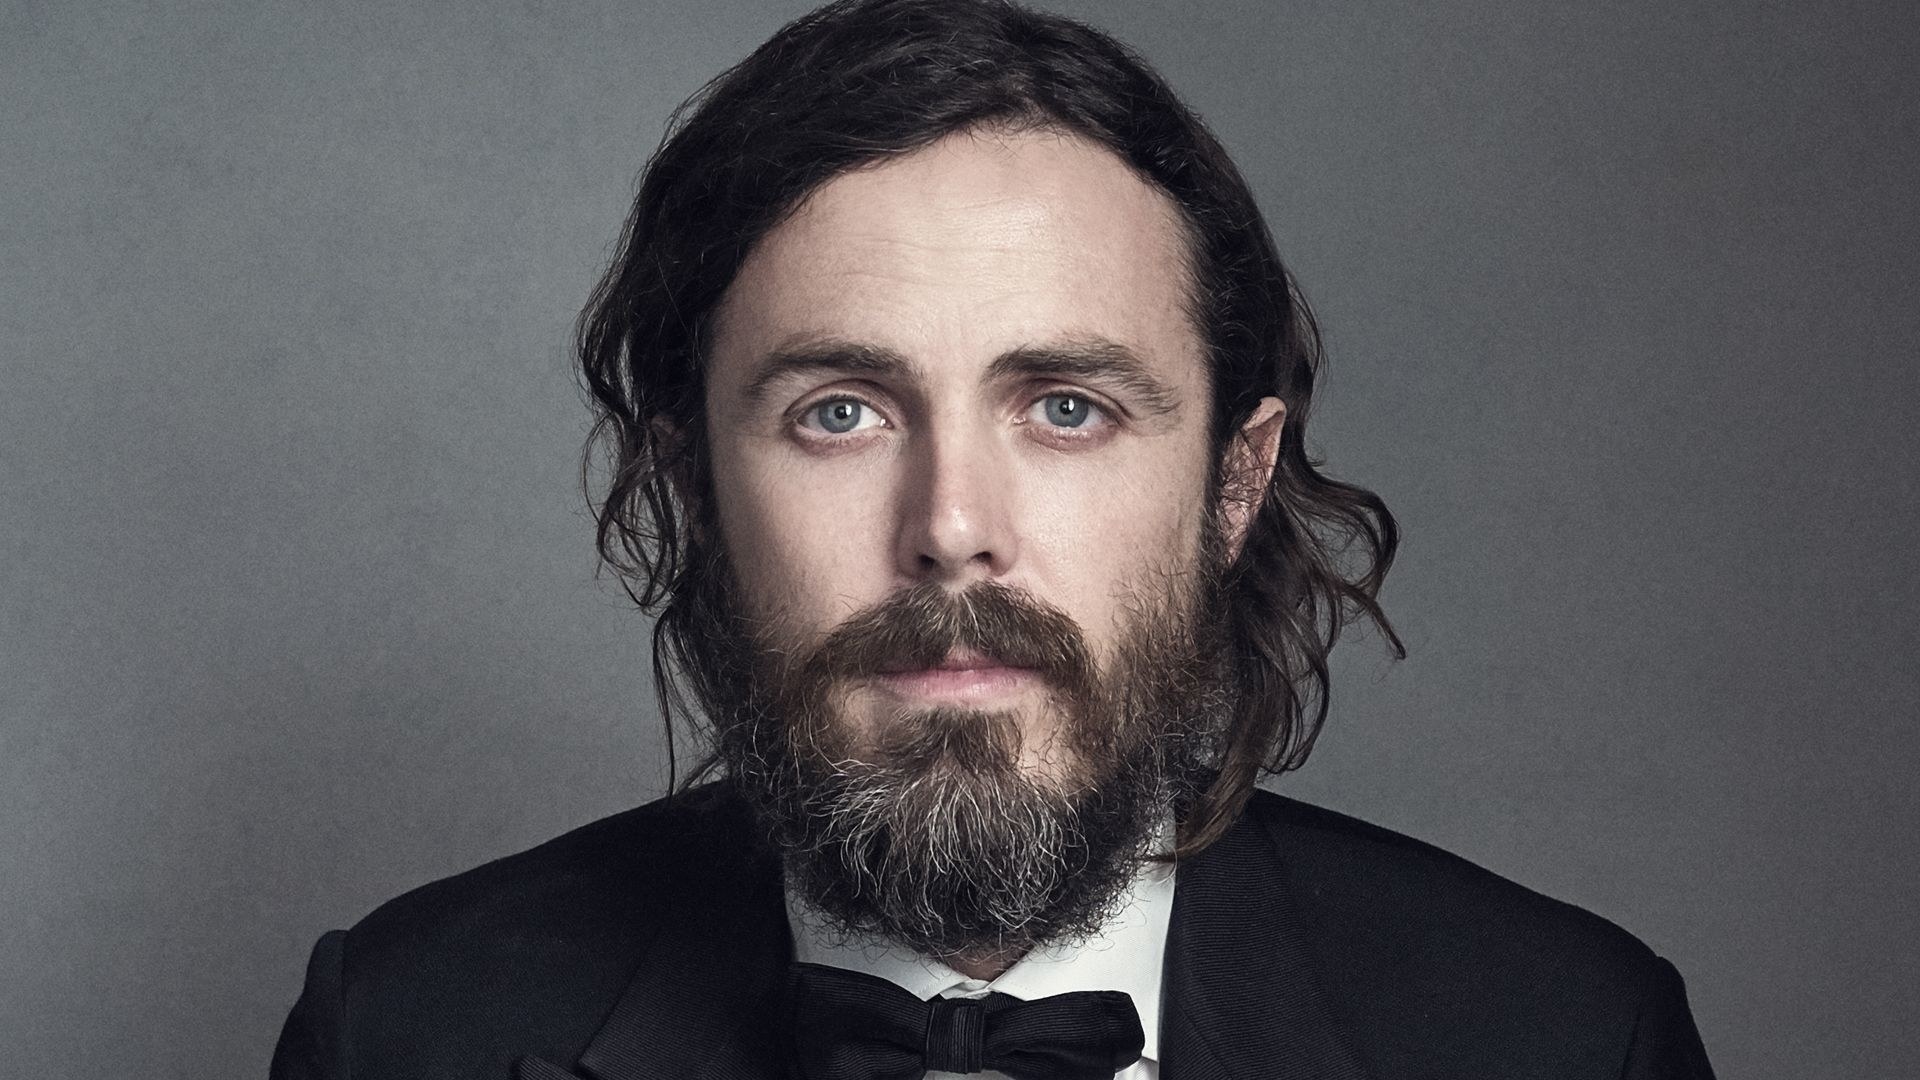 Casey Affleck, Actor's wallpapers, Posted by John Thompson, 1920x1080 Full HD Desktop